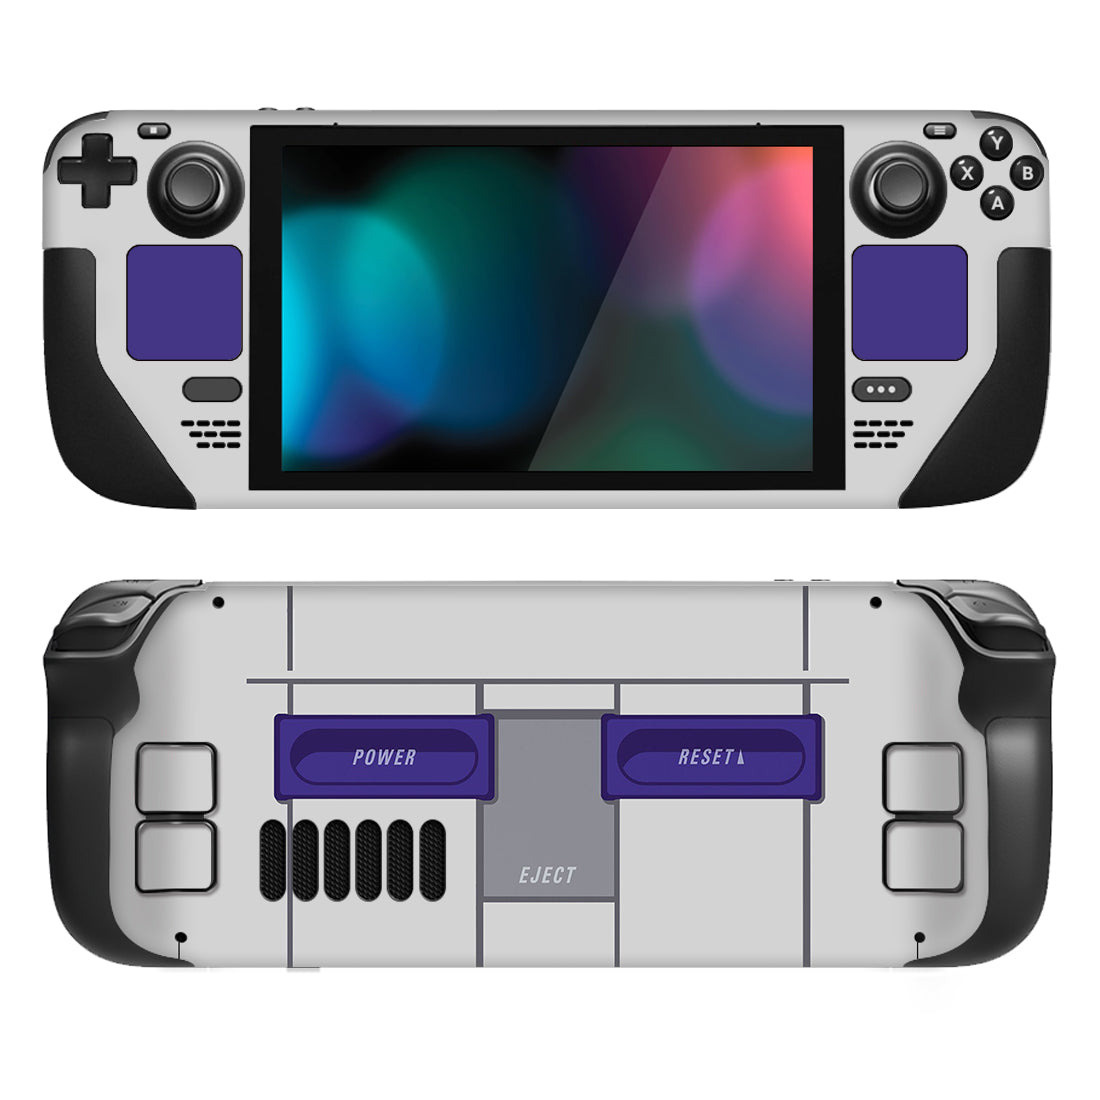 PlayVital Full Set Protective Skin Decal for Steam Deck, Custom Stickers Vinyl Cover for Steam Deck Handheld Gaming PC - Classics SNES Style - SDTM062 PlayVital